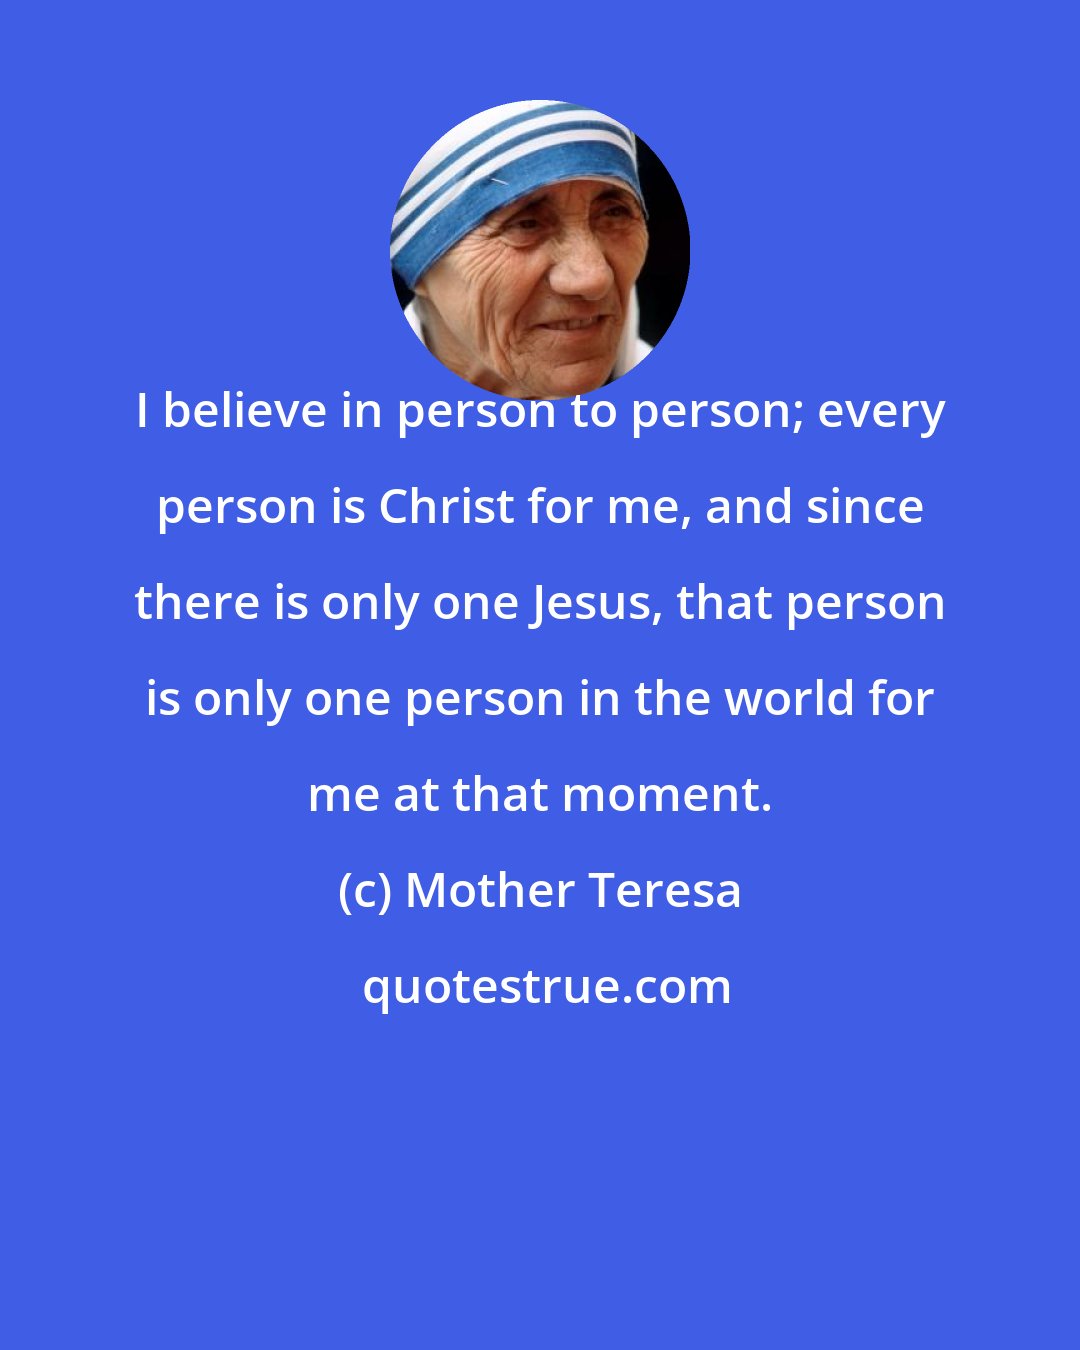 Mother Teresa: I believe in person to person; every person is Christ for me, and since there is only one Jesus, that person is only one person in the world for me at that moment.